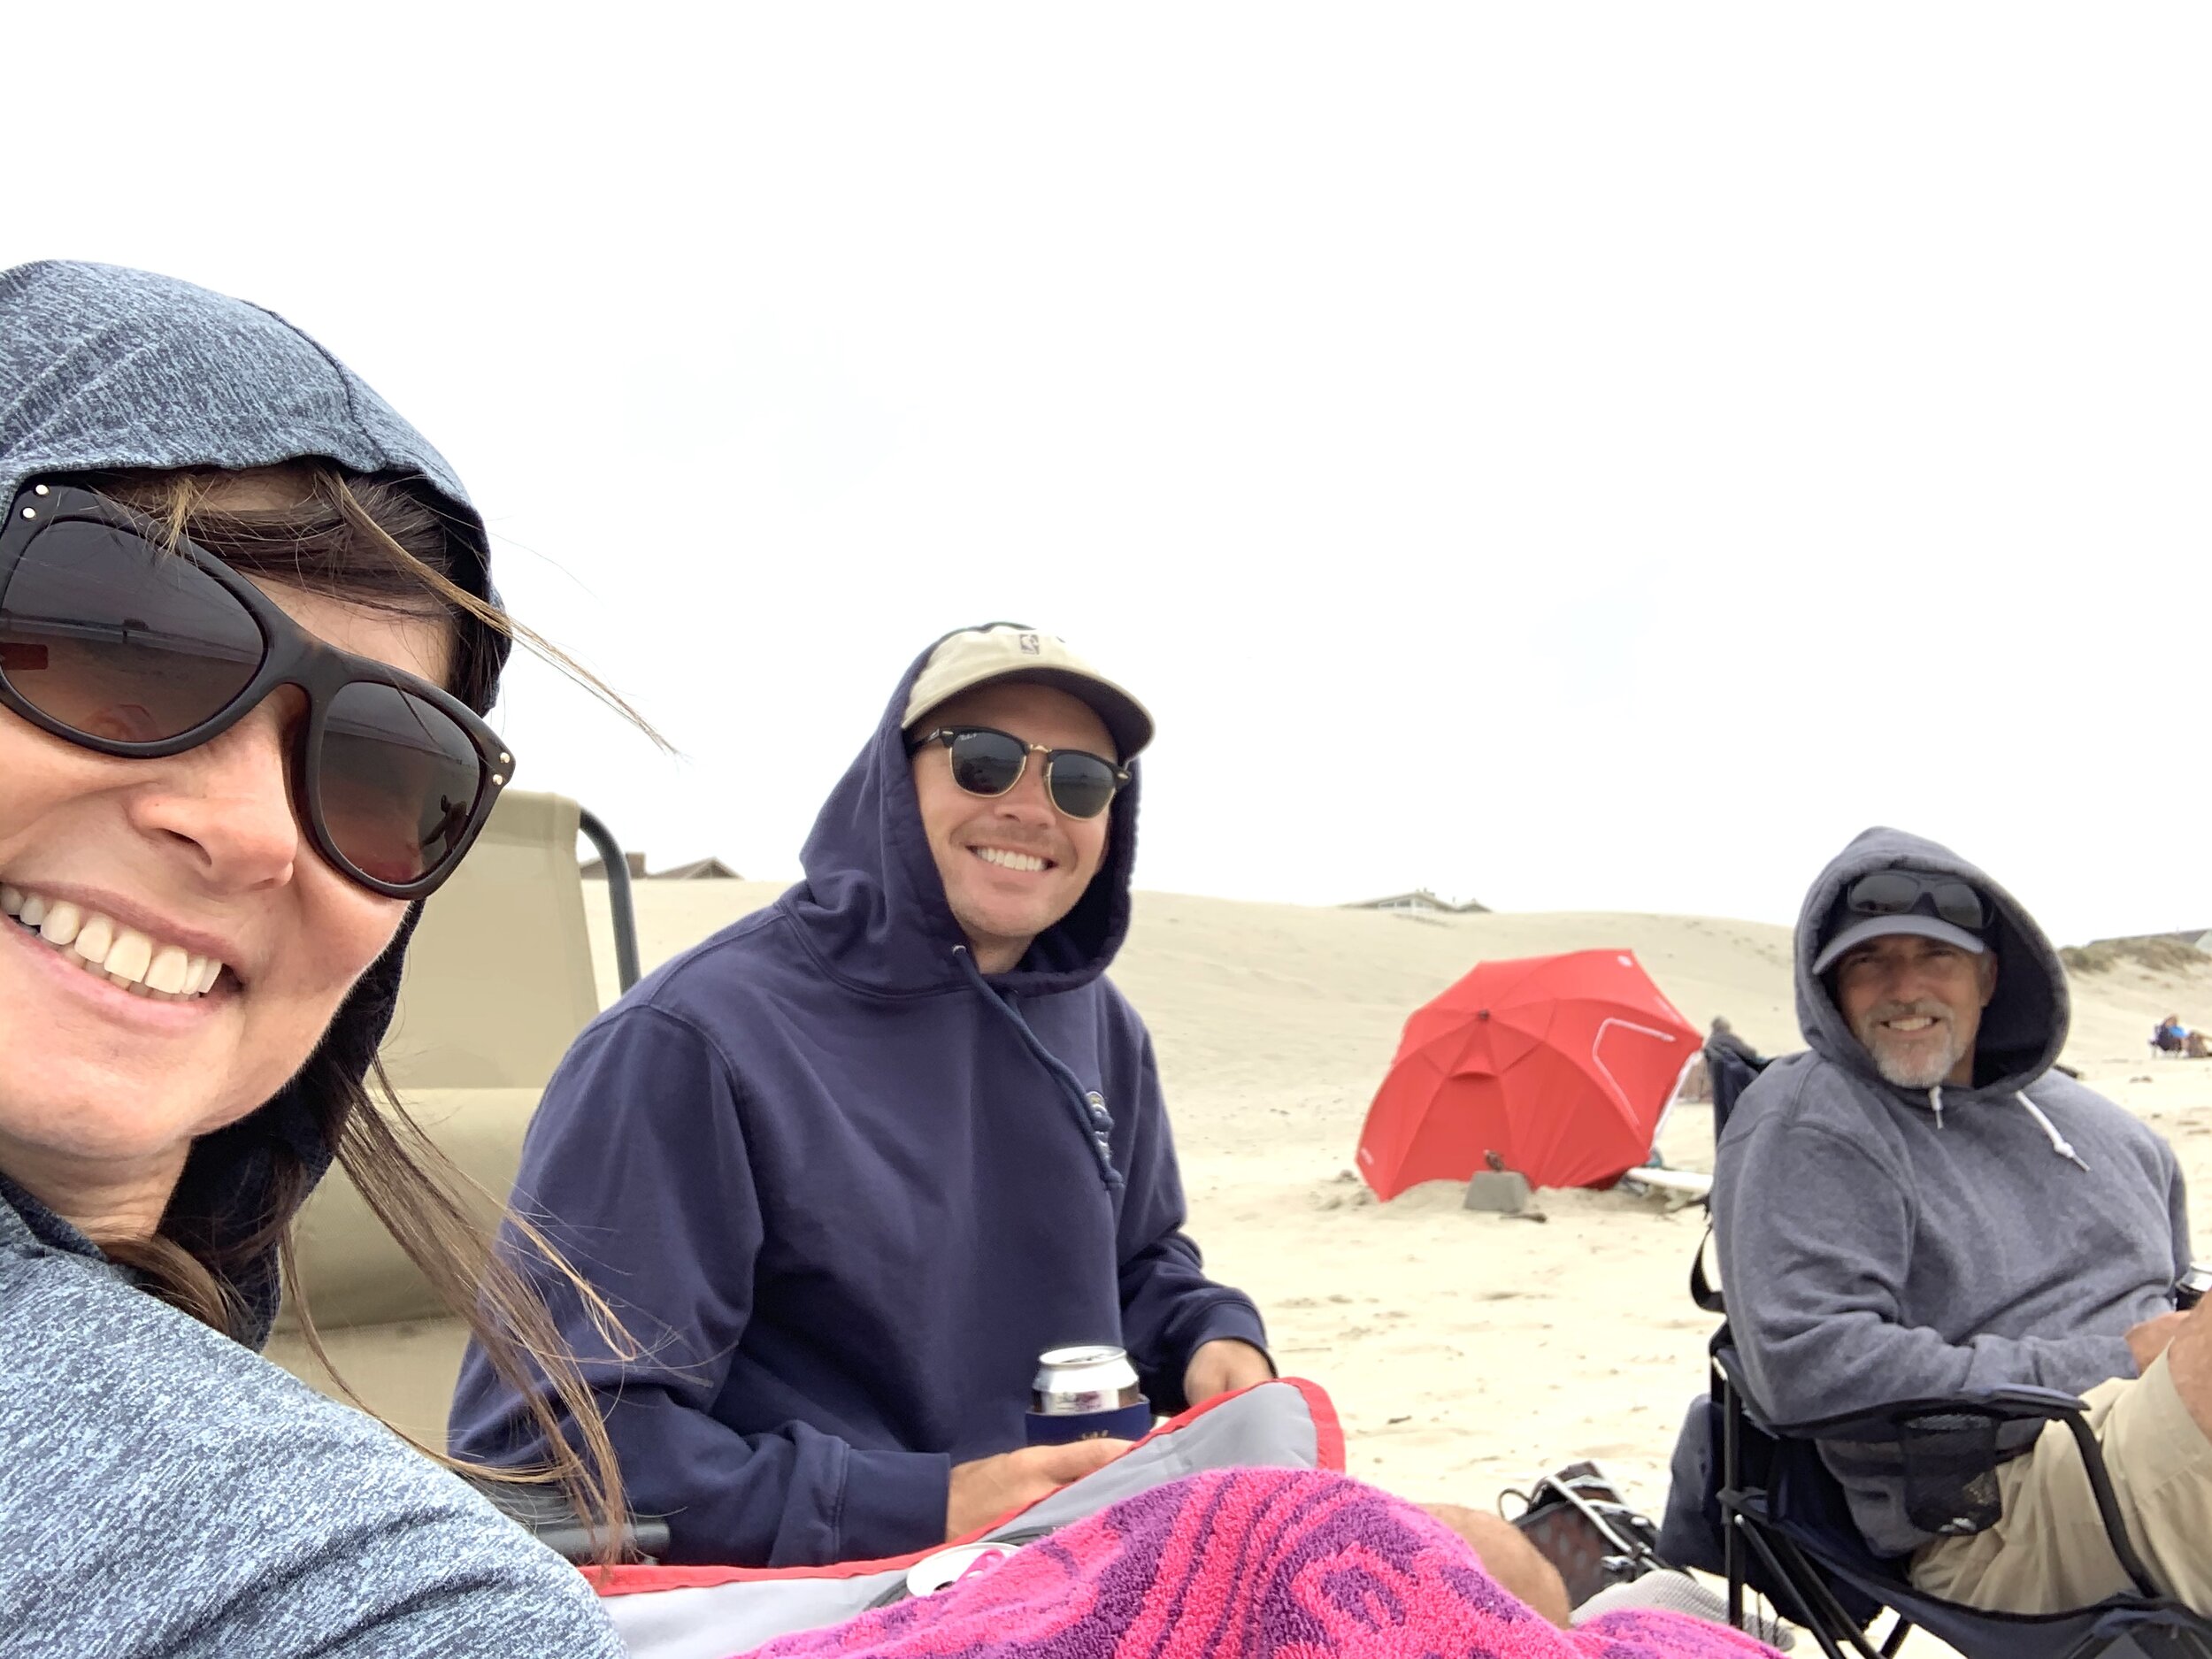  Since Cannon Beach was surprisingly warm, we assumed  Pacific City Beach,  about 75 miles south, would be as well. It was not.  We were pretty cold but determined a beach day is a beach day, and as we say,  "A freezing day at the beach is better tha